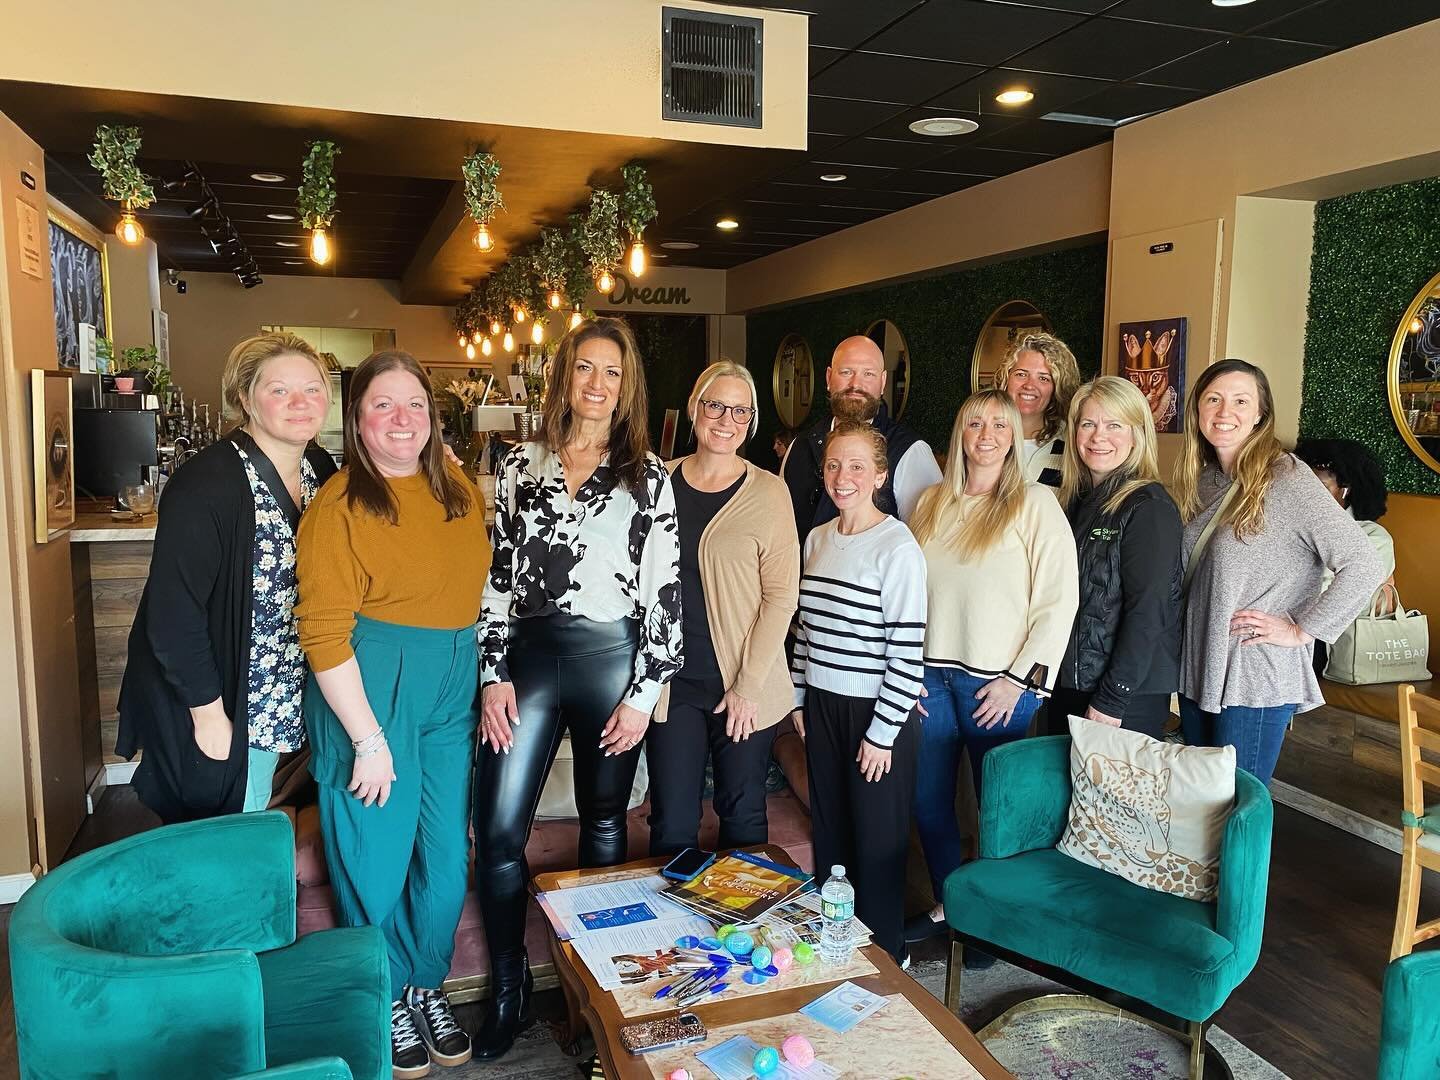 Grateful for at Cathy Lane @discoverybehavioralhealth for an awesome mental health, networking event! It was great to connect with other individuals creating positive change in the mental health field. #mentalhealthawareness